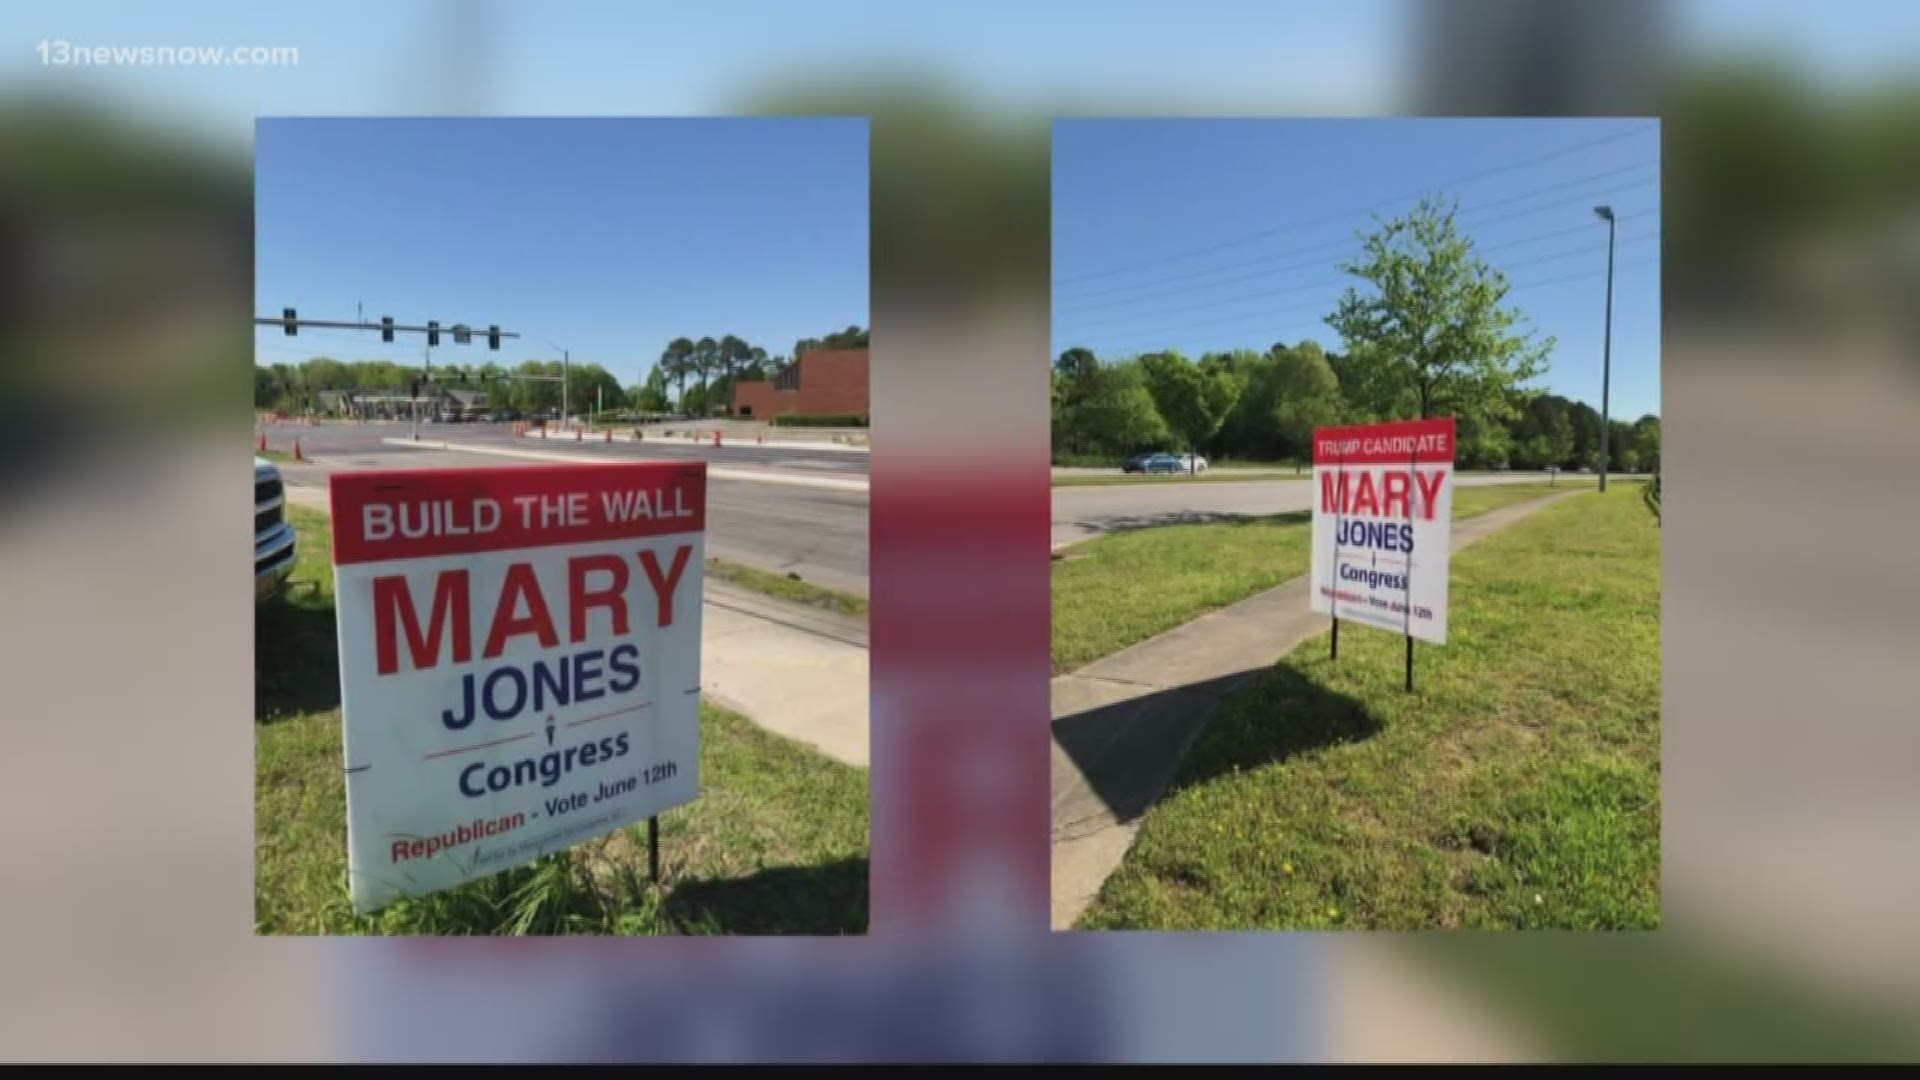 Republican Mary Jones is challenging Republican Congressman Scott Taylor for the second district seat.